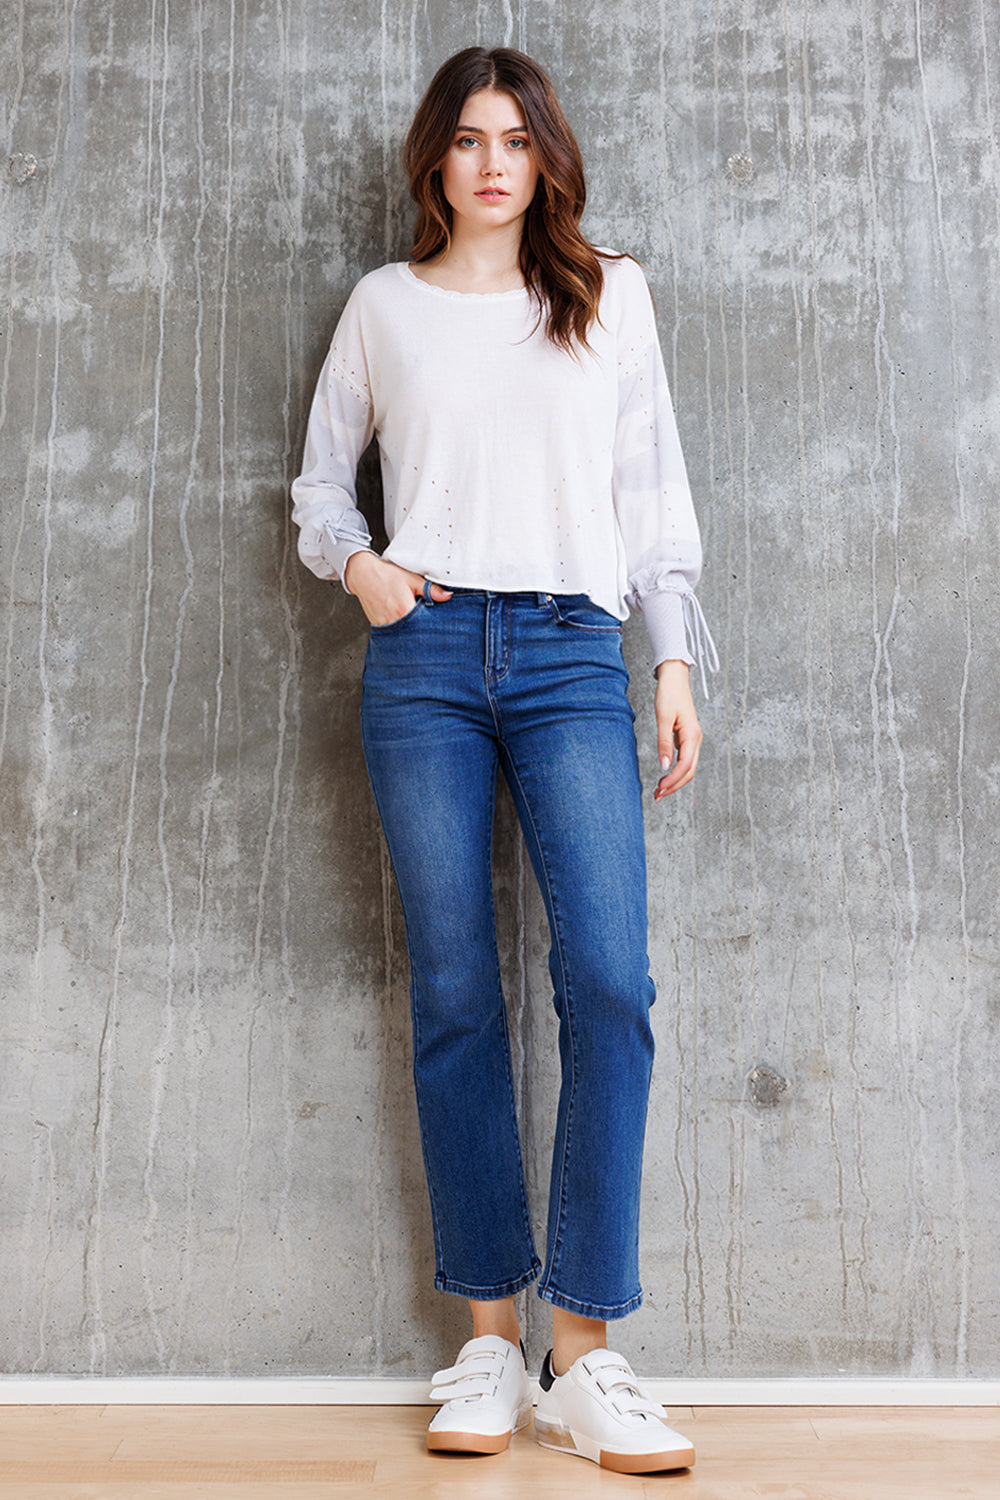 PajamaJeans® High-Waist Bootcut Jeans in Bootcut